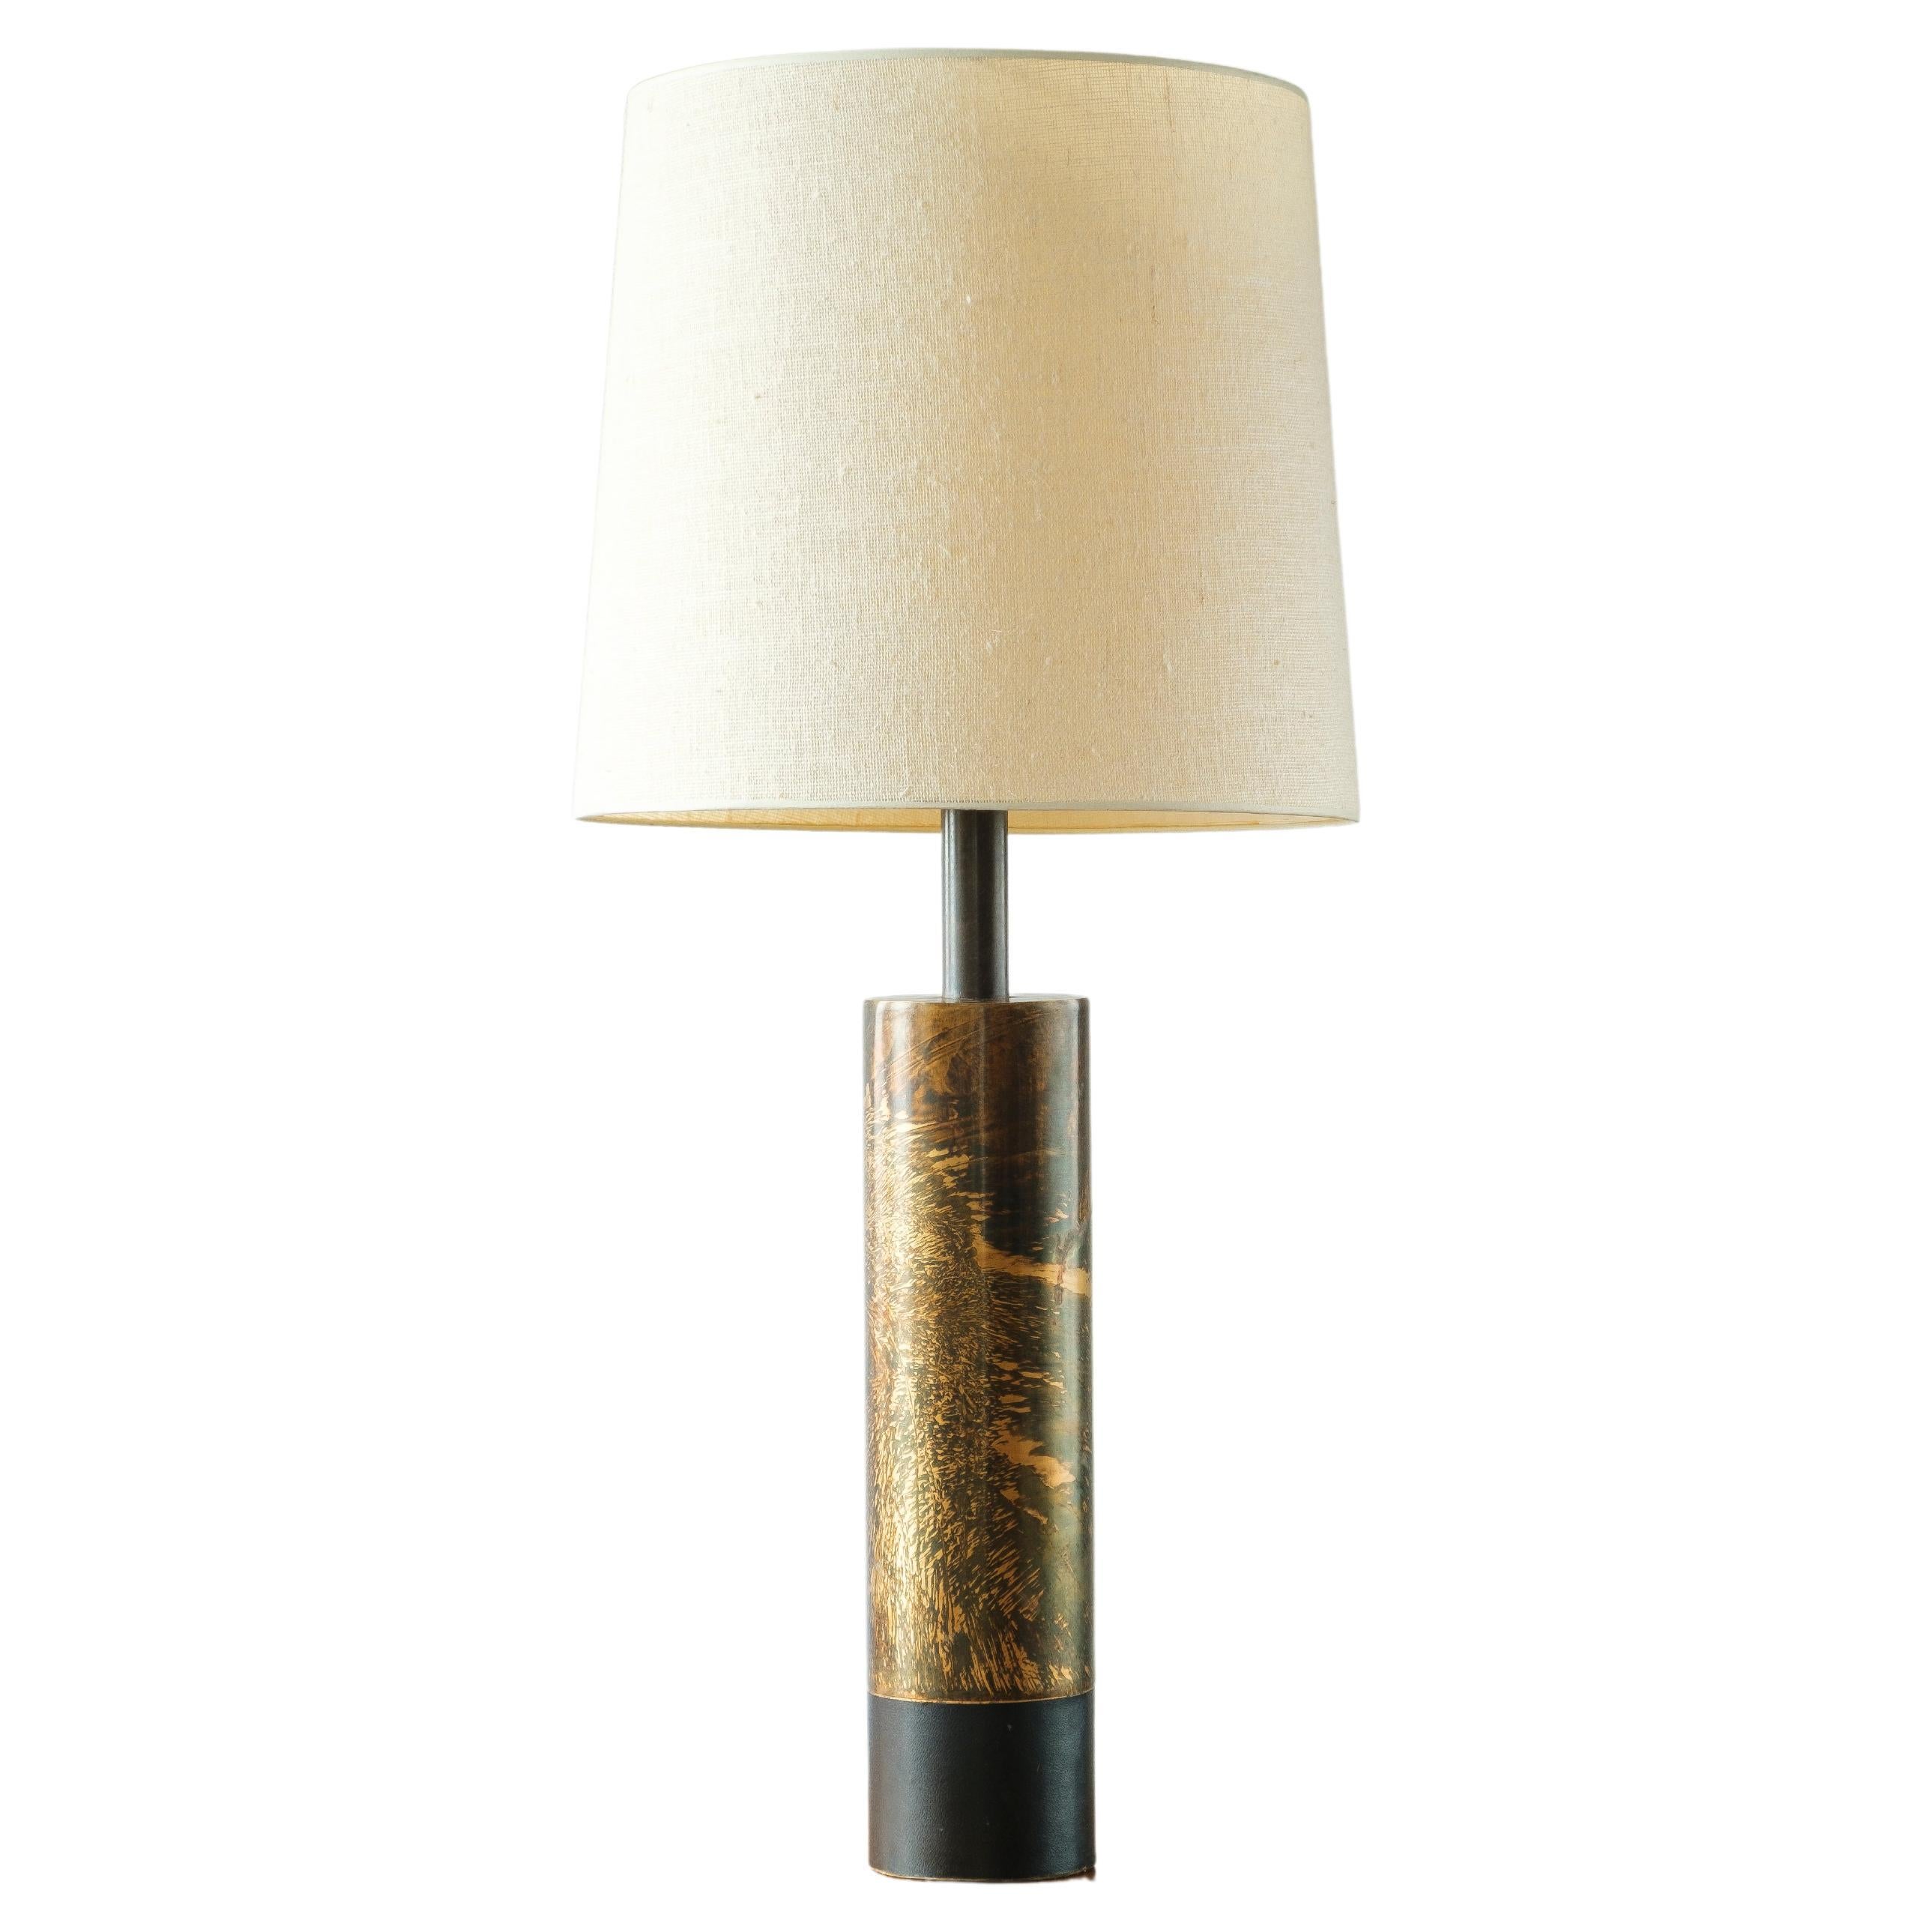 Laurel Lamp Co. H-890 Acid Etched Brass With Leather Base Cuff Table Lamp For Sale